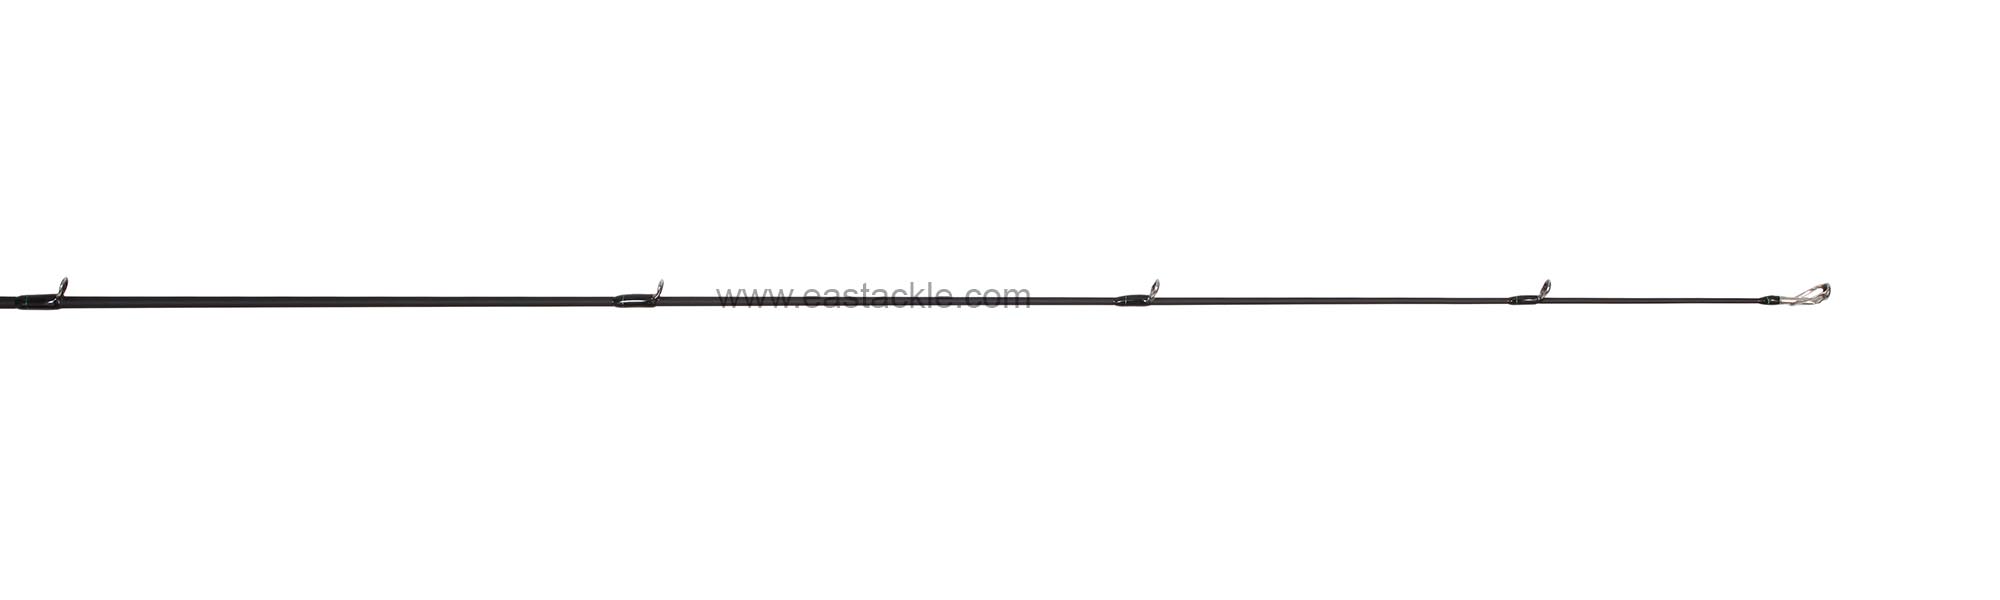 Rapala - Koivu - KVC652L - Bait Casting Rod - Tip Section (Side View) | Eastackle